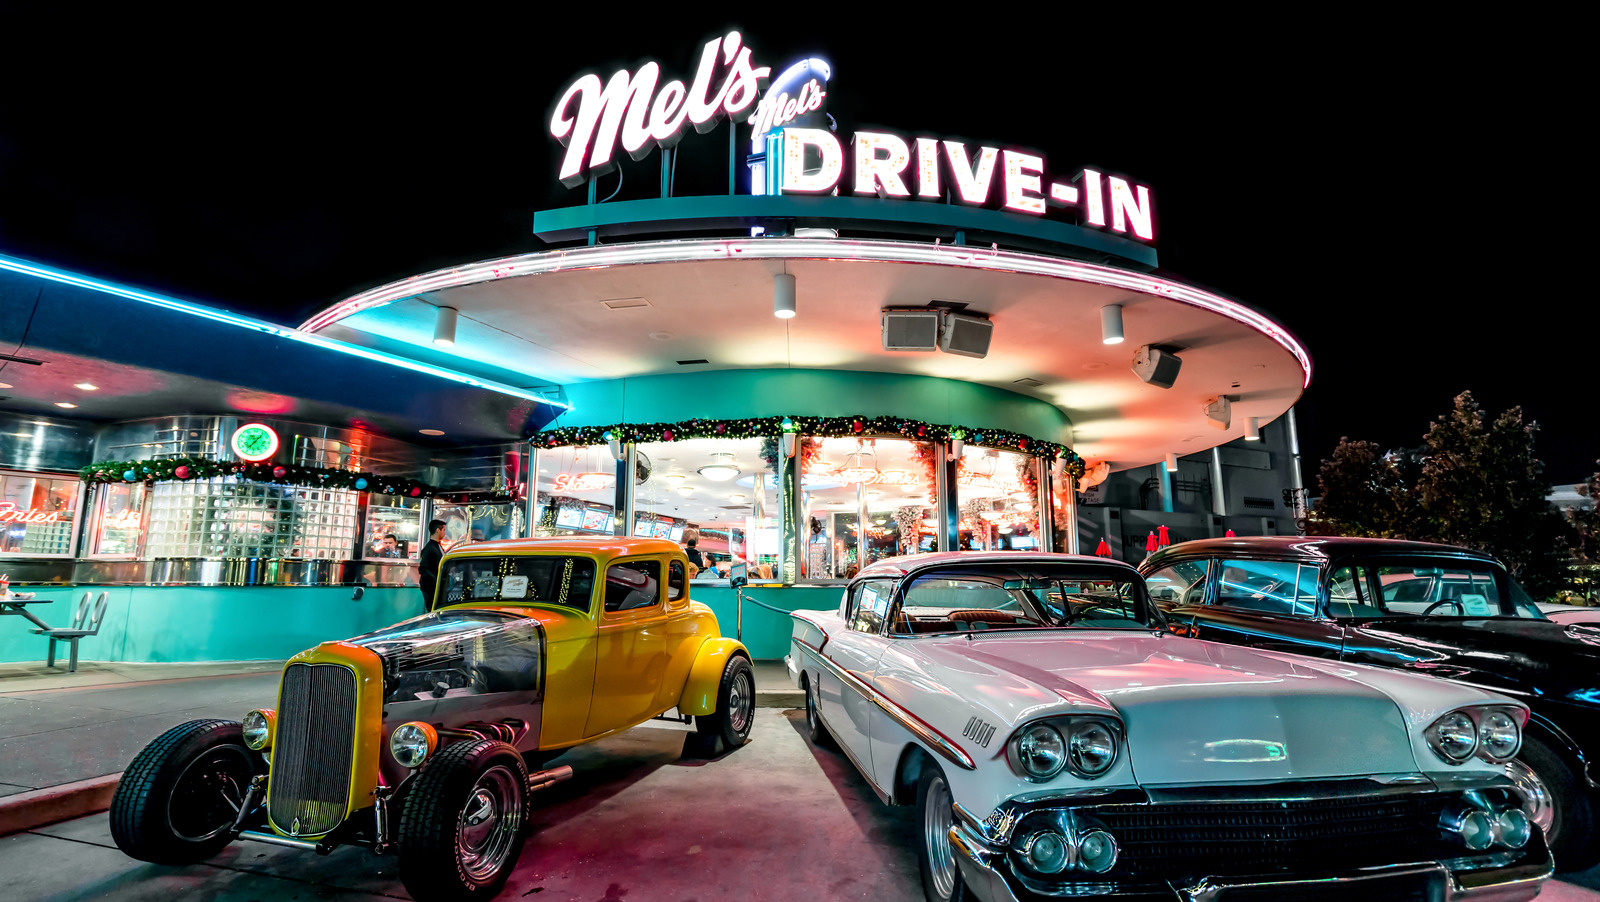 What Was The First DriveIn Restaurant Established In The U.S.?